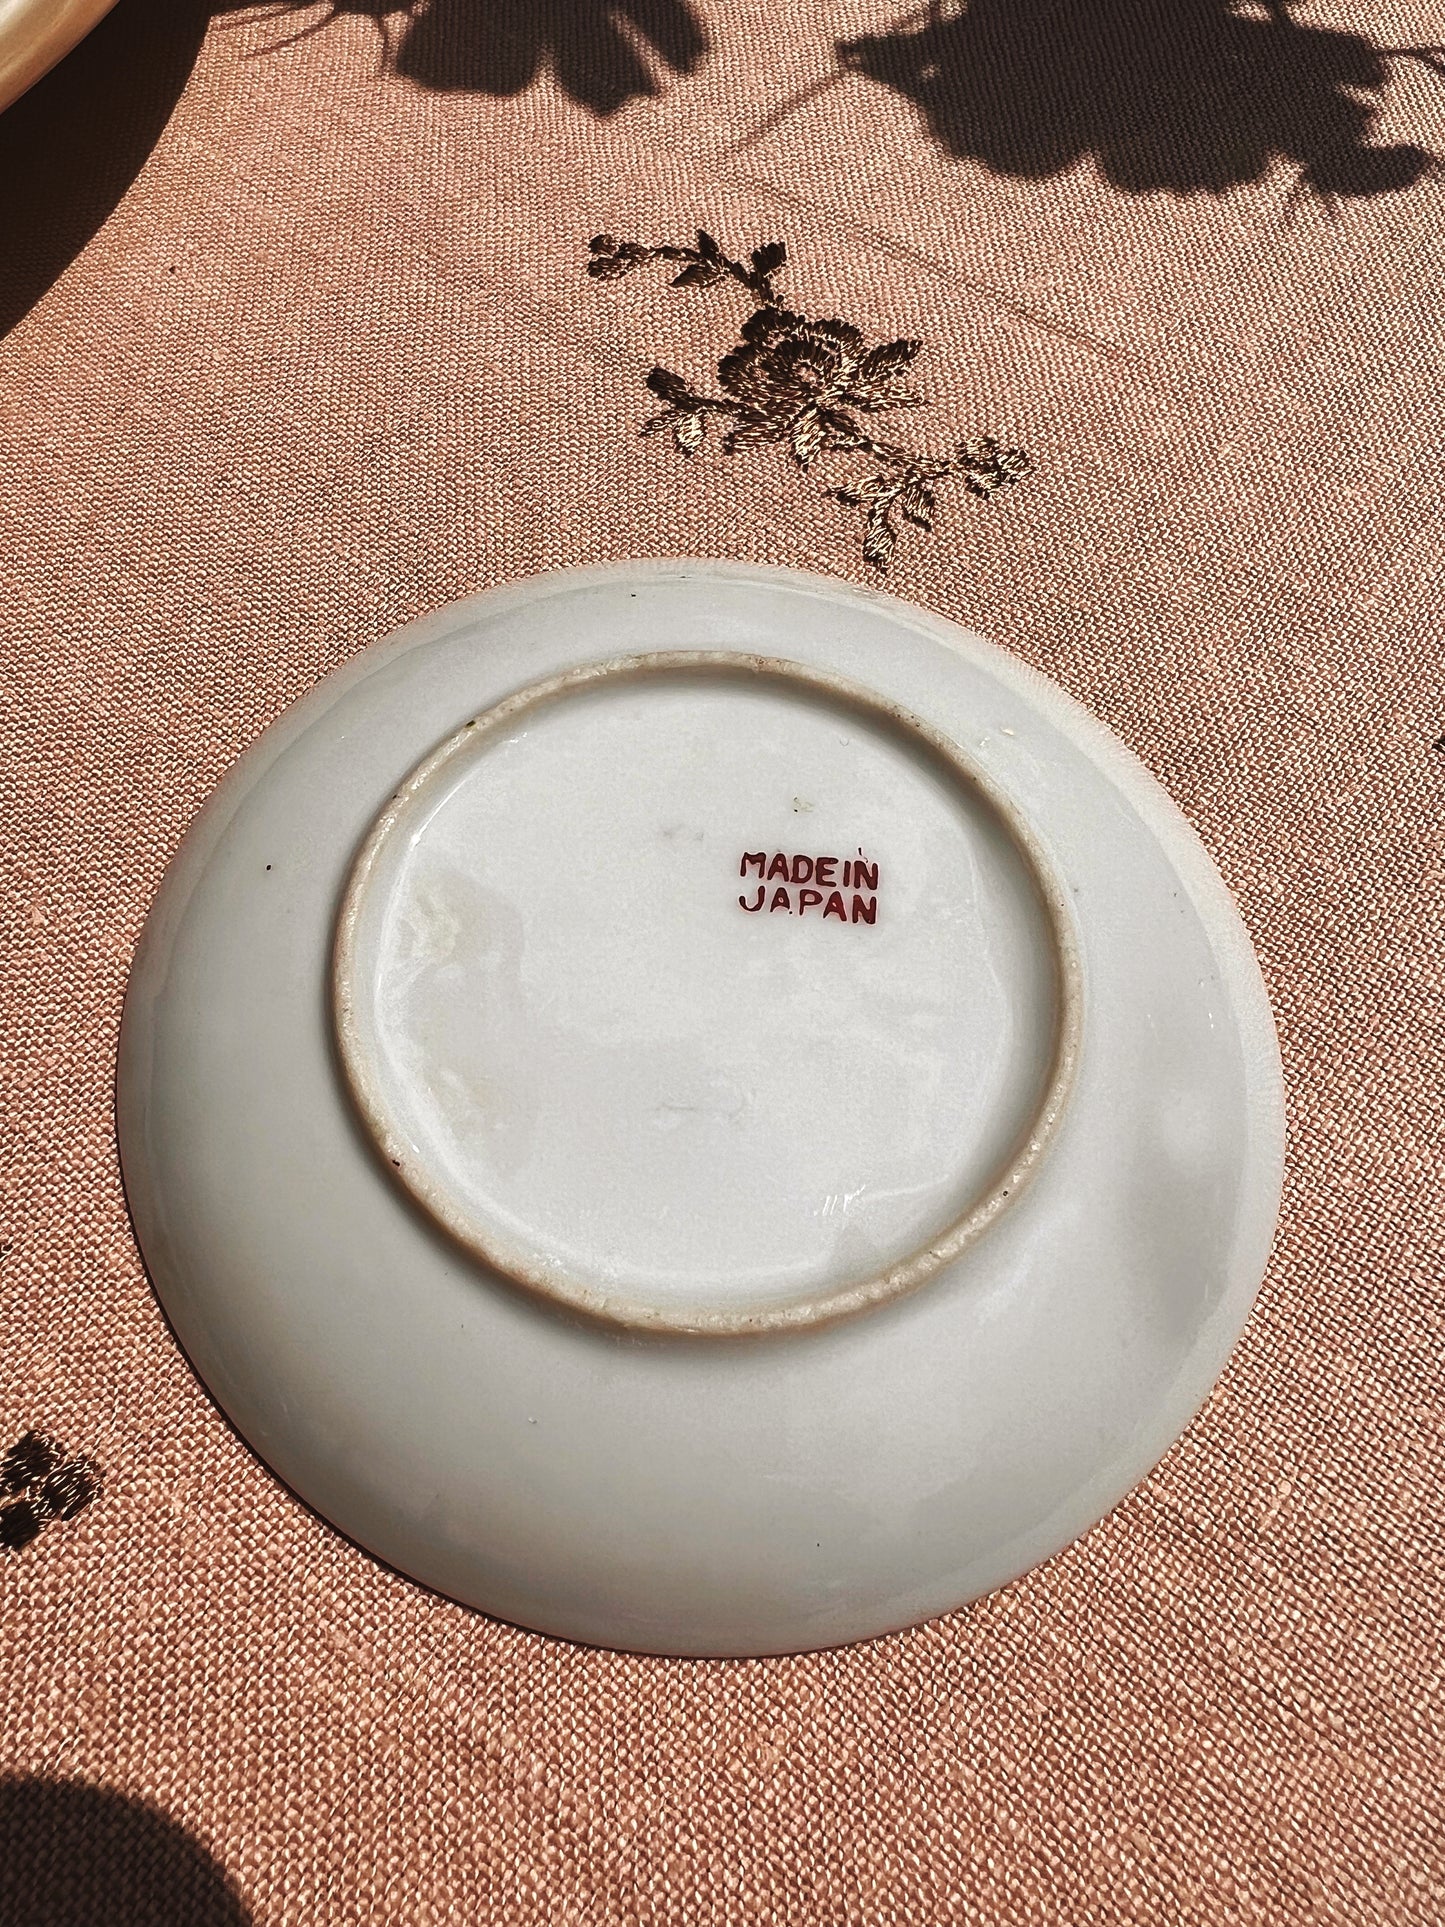 Vintage Hand Painted Saucer